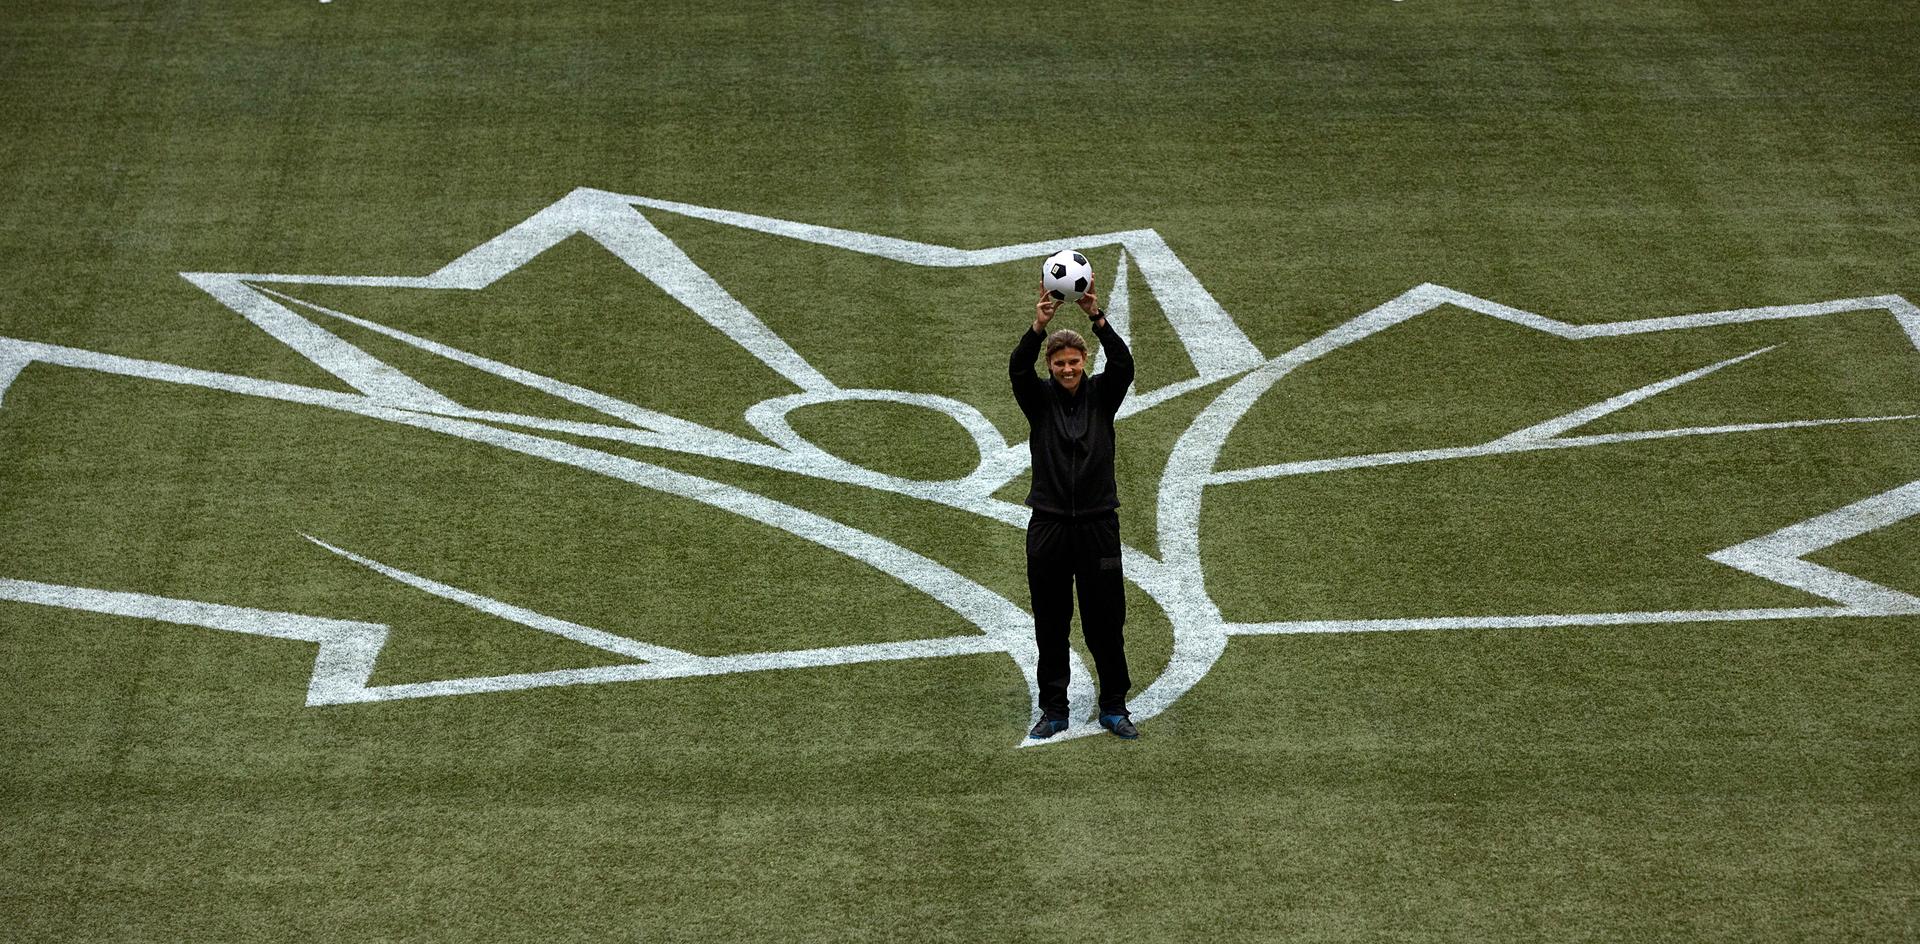 Canadian National Women's Soccer team captain Christine Sinclair poses with the logo for the 2015 FIFA Women's World Cup on the artificial turf field at BC Place in Vancouver, British Columbia.